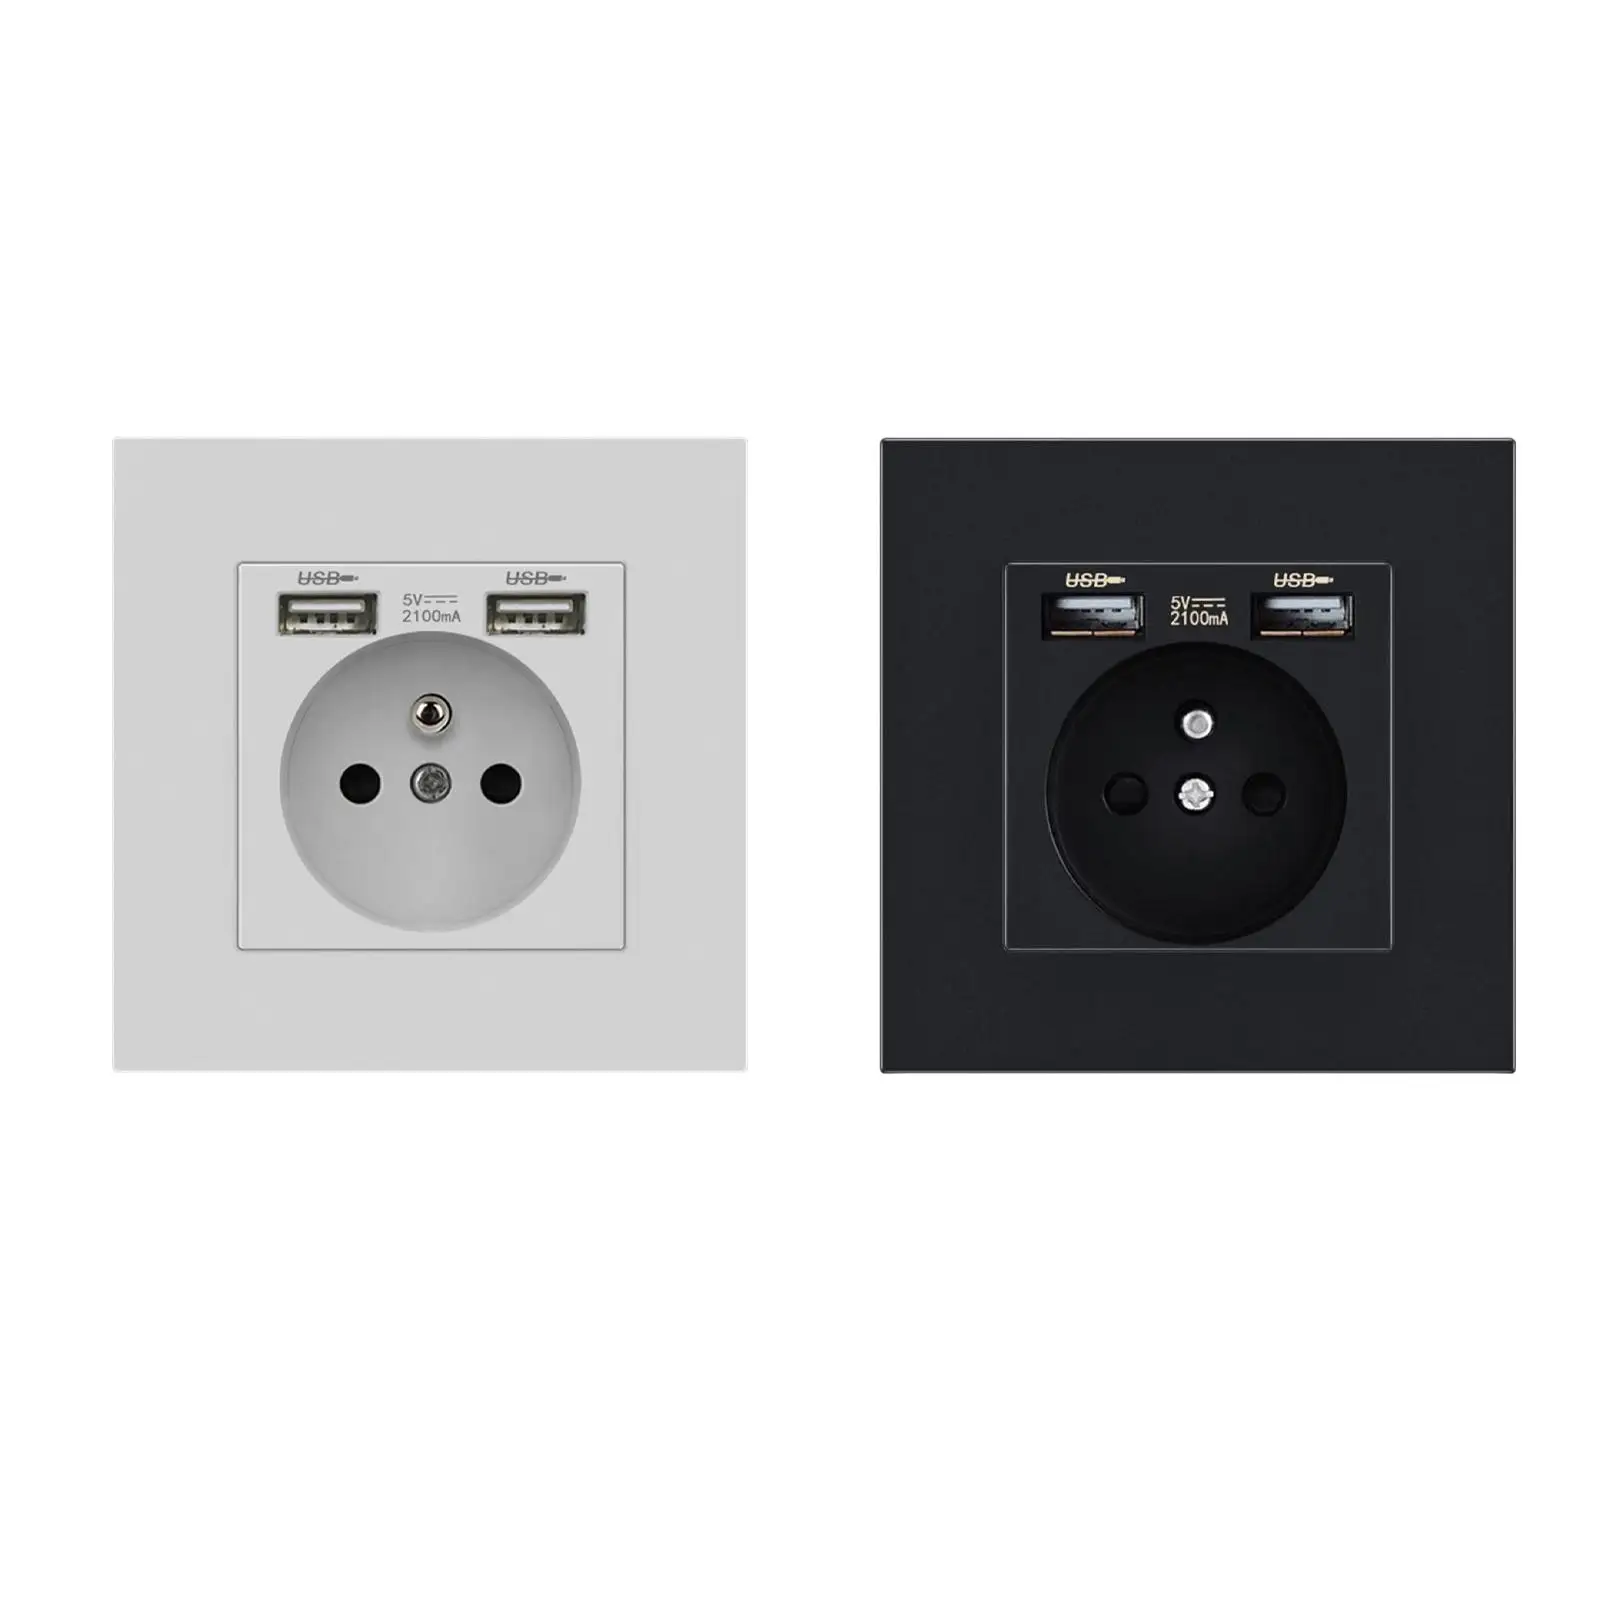 Power Socket with USB Charging Port Socket Electrical Socket for Home Office Household Appliances